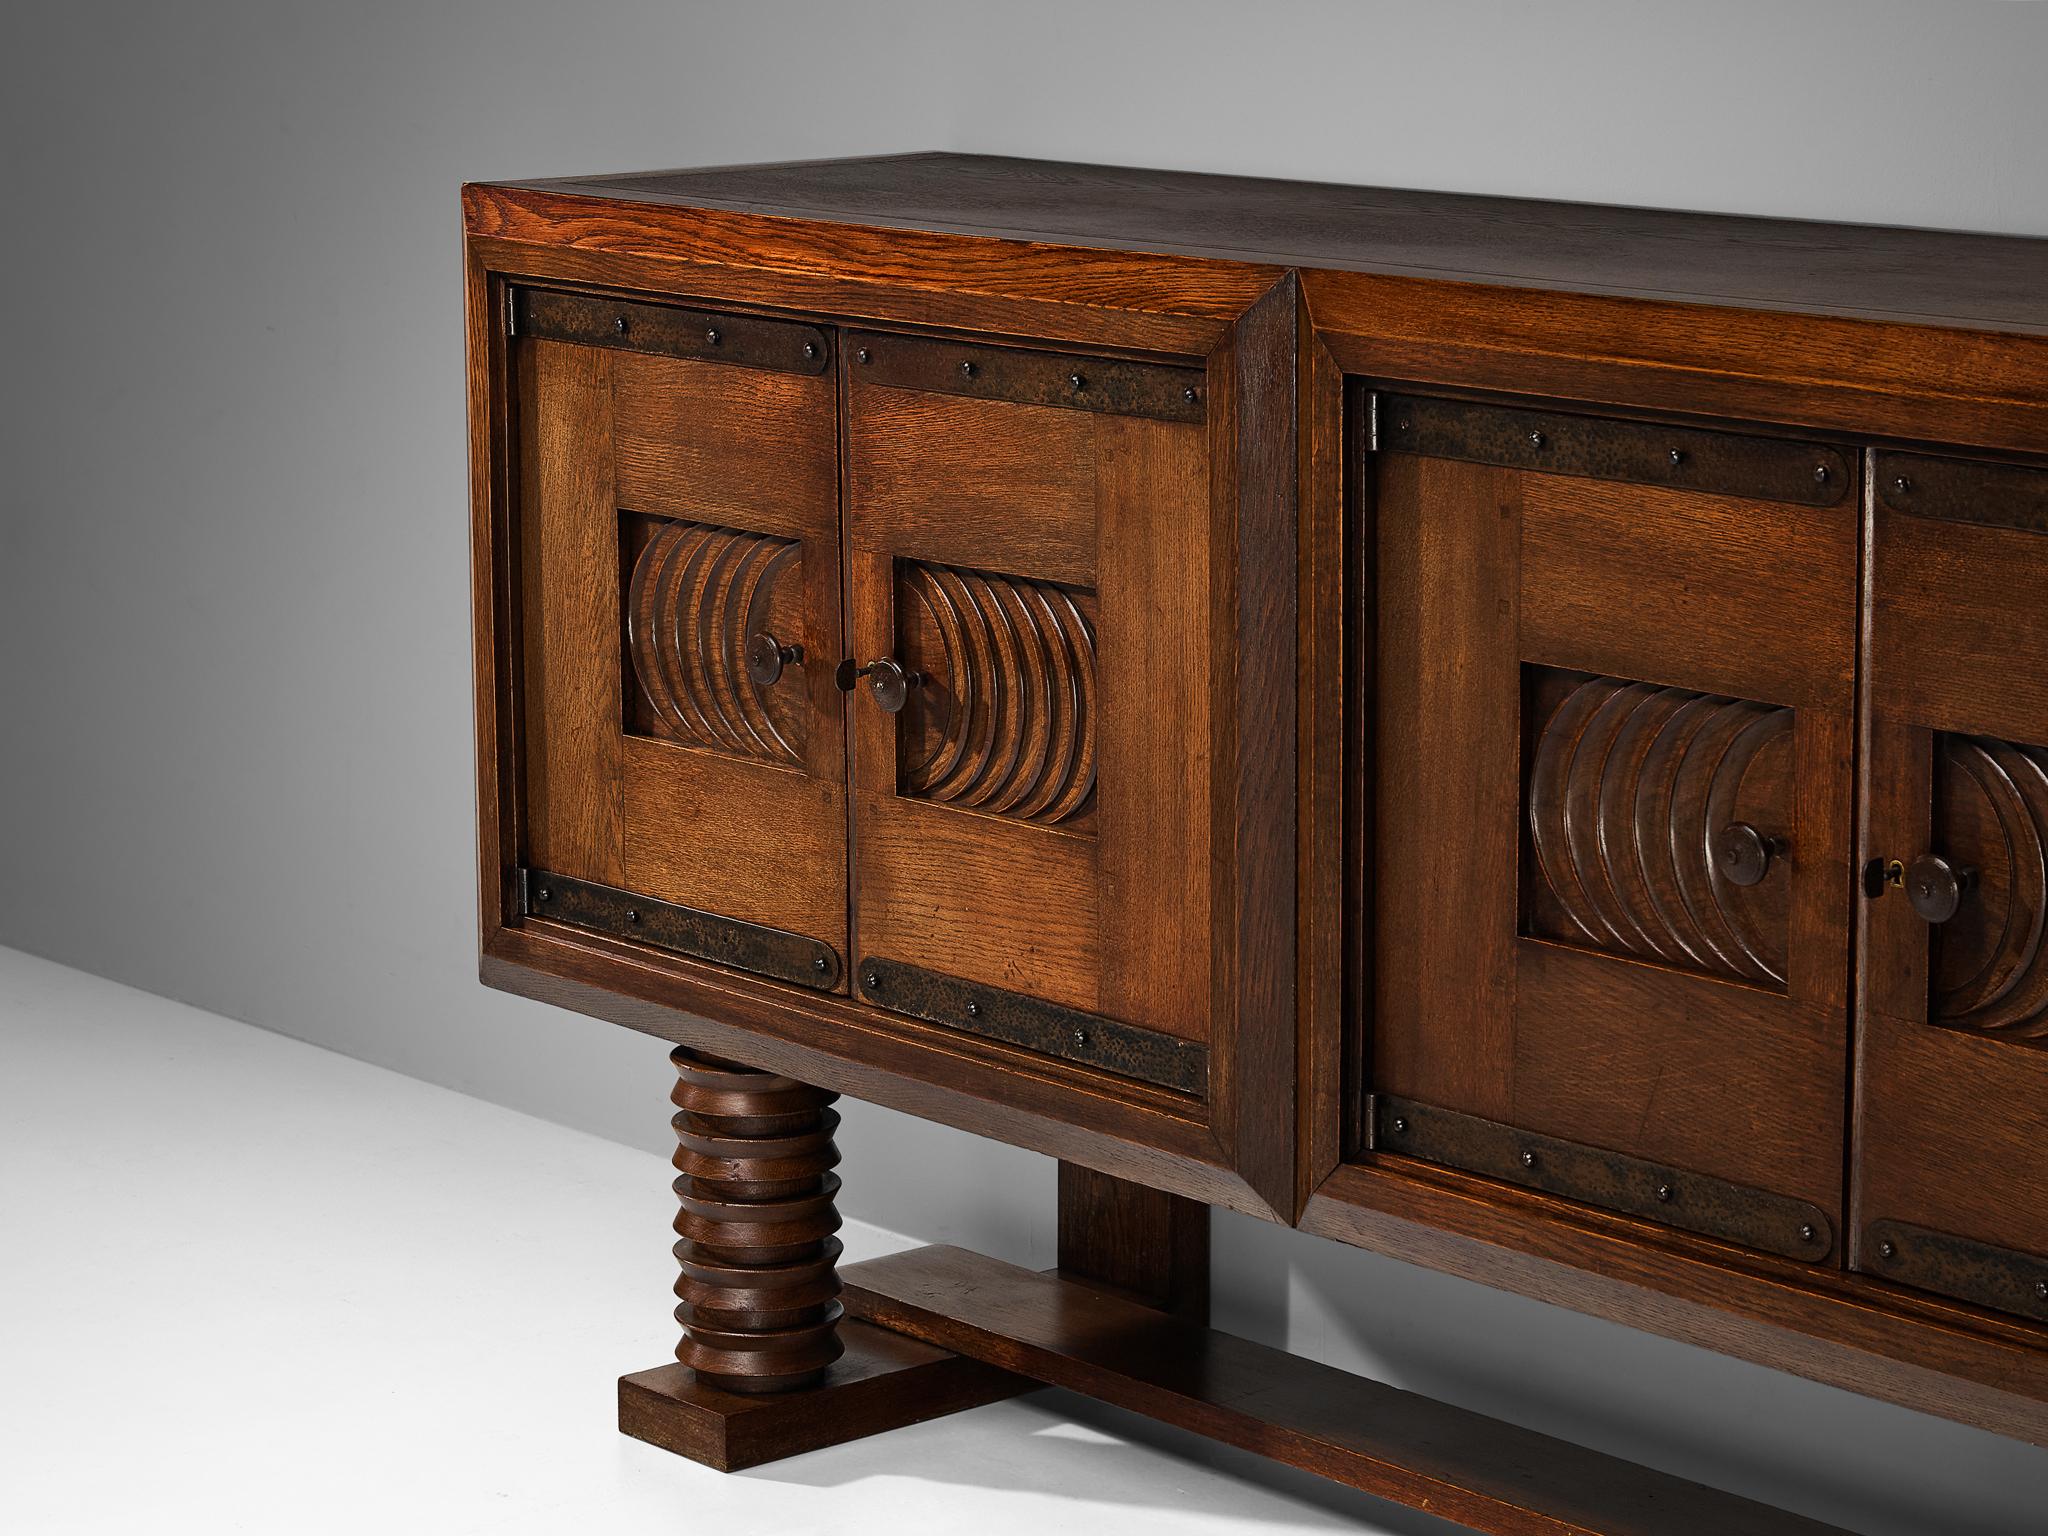  Parisian Art Deco Sideboard in Solid Oak with Iron Elements For Sale 3